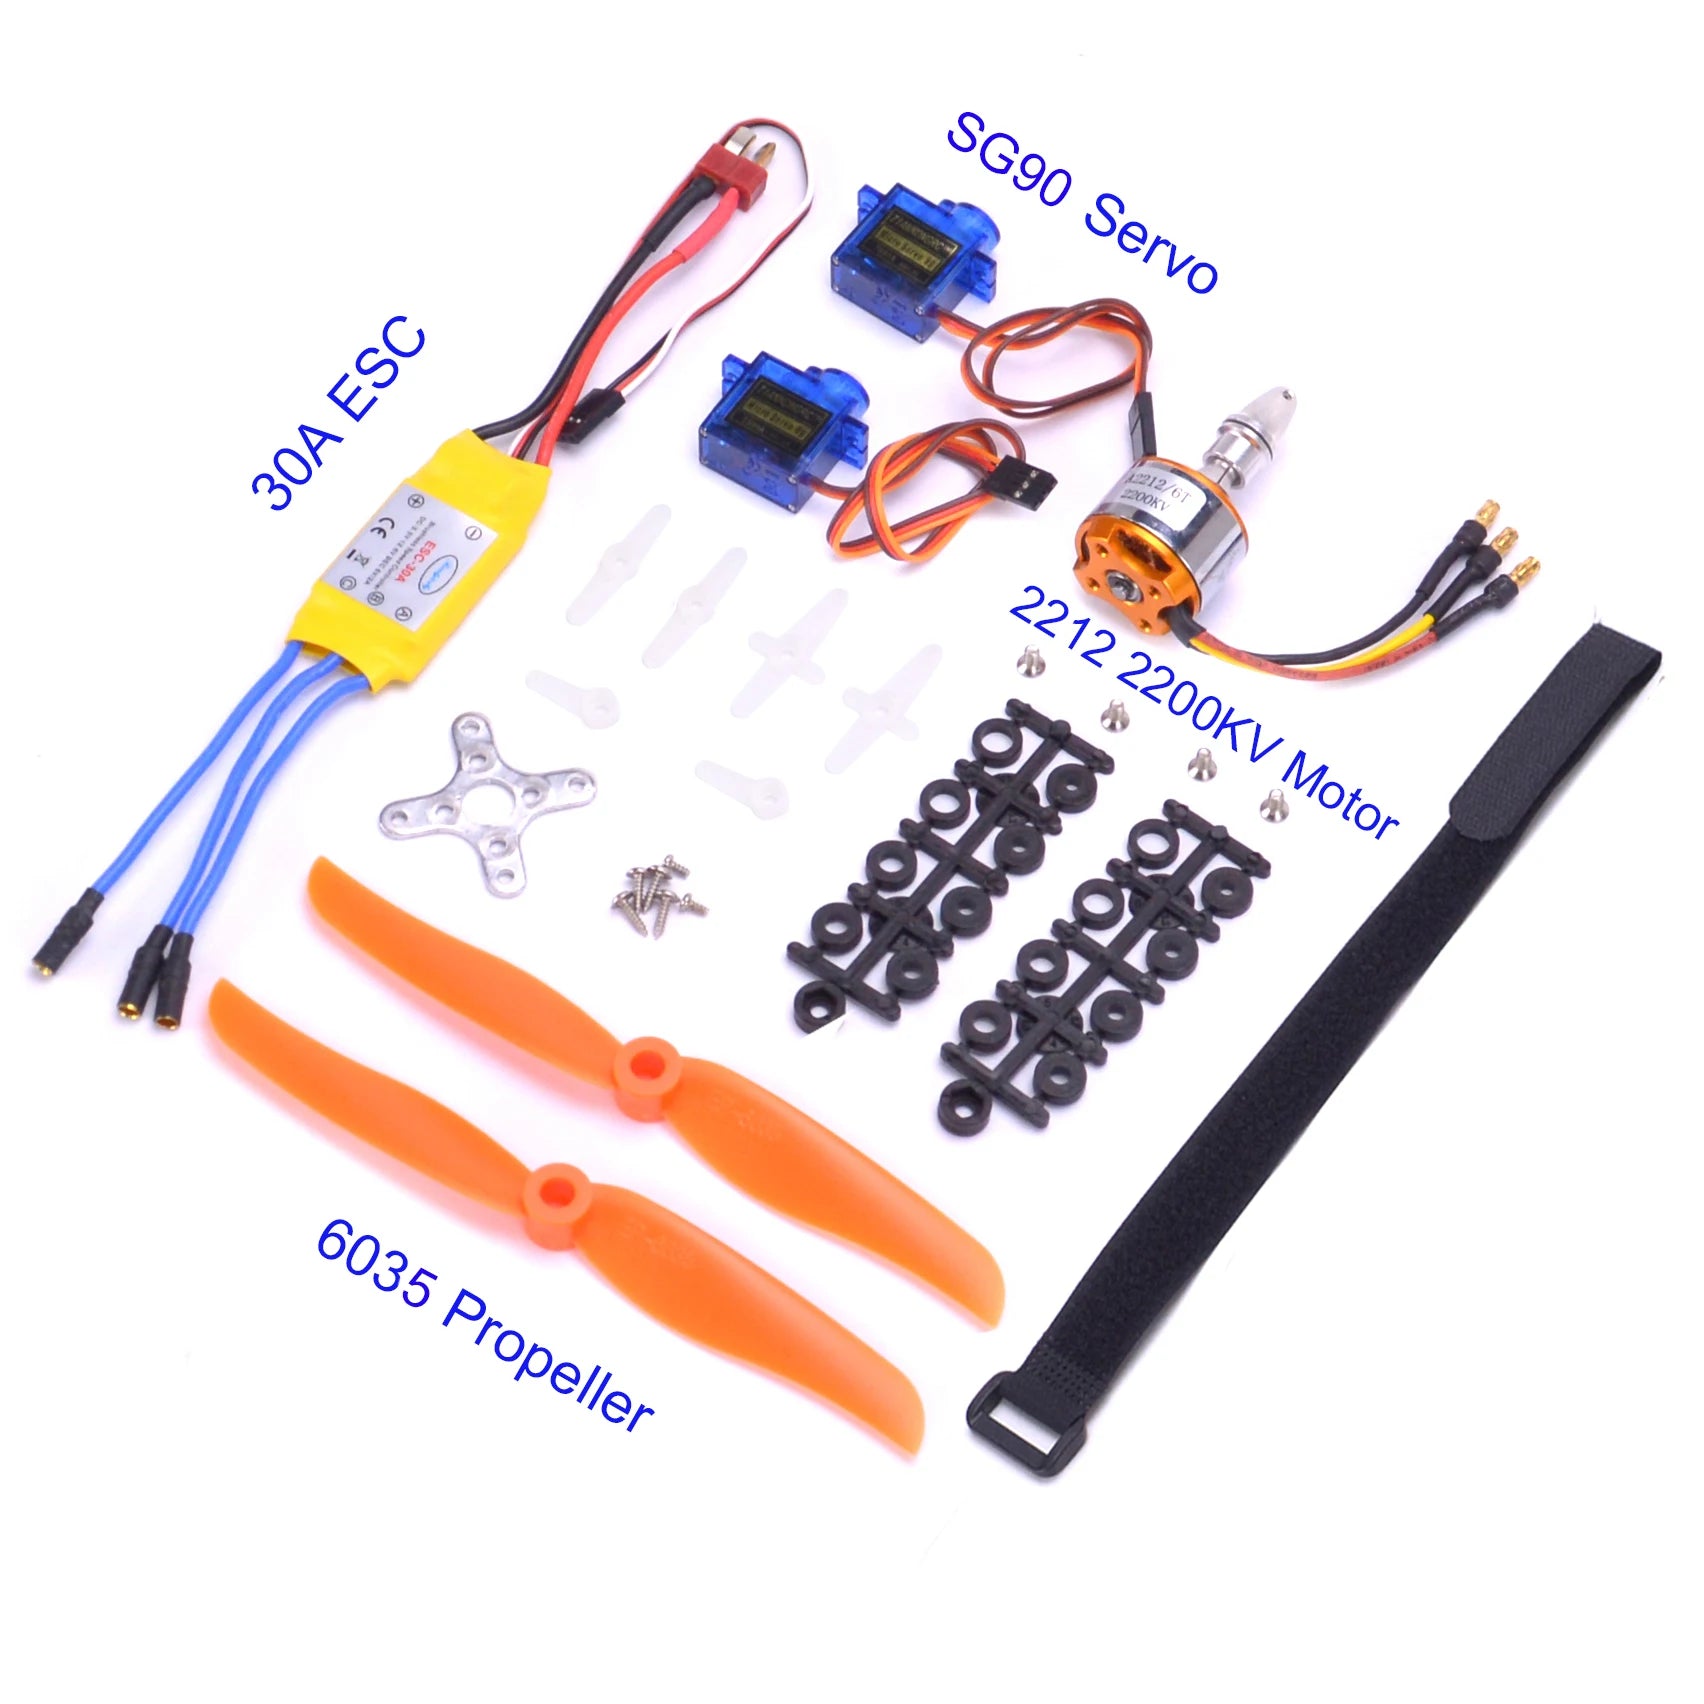 FPV Motor, -Input Voltage: 2-3cells lithium battery or 5-9 cells NiCd